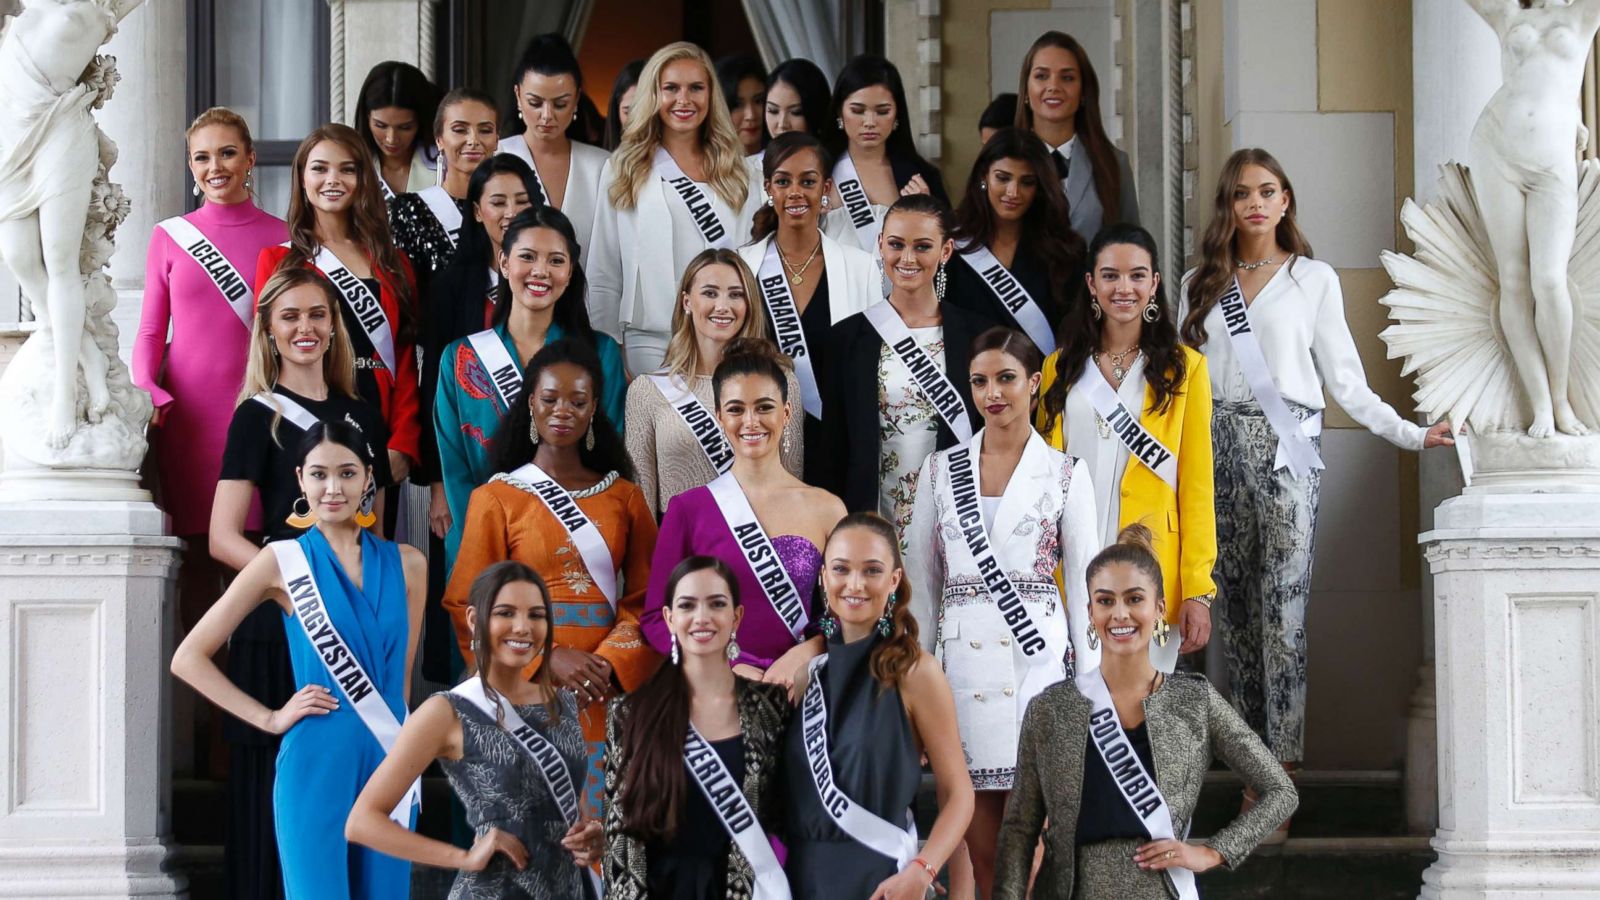 Miss Universe 2023: Contestant Photos, How to Watch, Judges - Parade